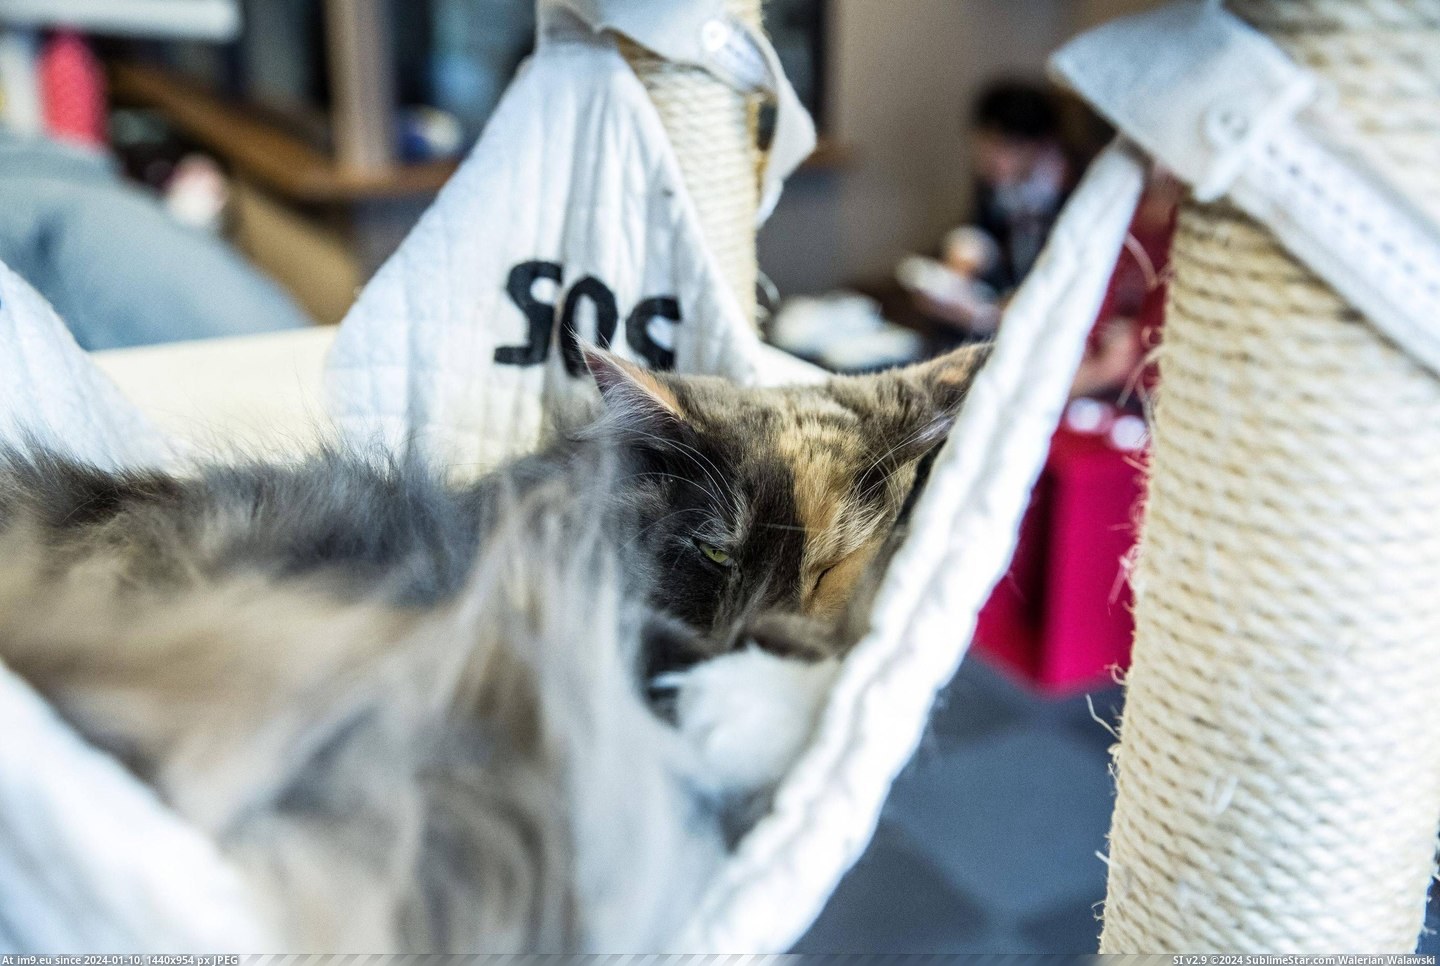 #Cats #Cat #Visited #Tokyo #Cafe [Cats] I visited a cat cafe in Tokyo... 12 Pic. (Bild von album My r/CATS favs))